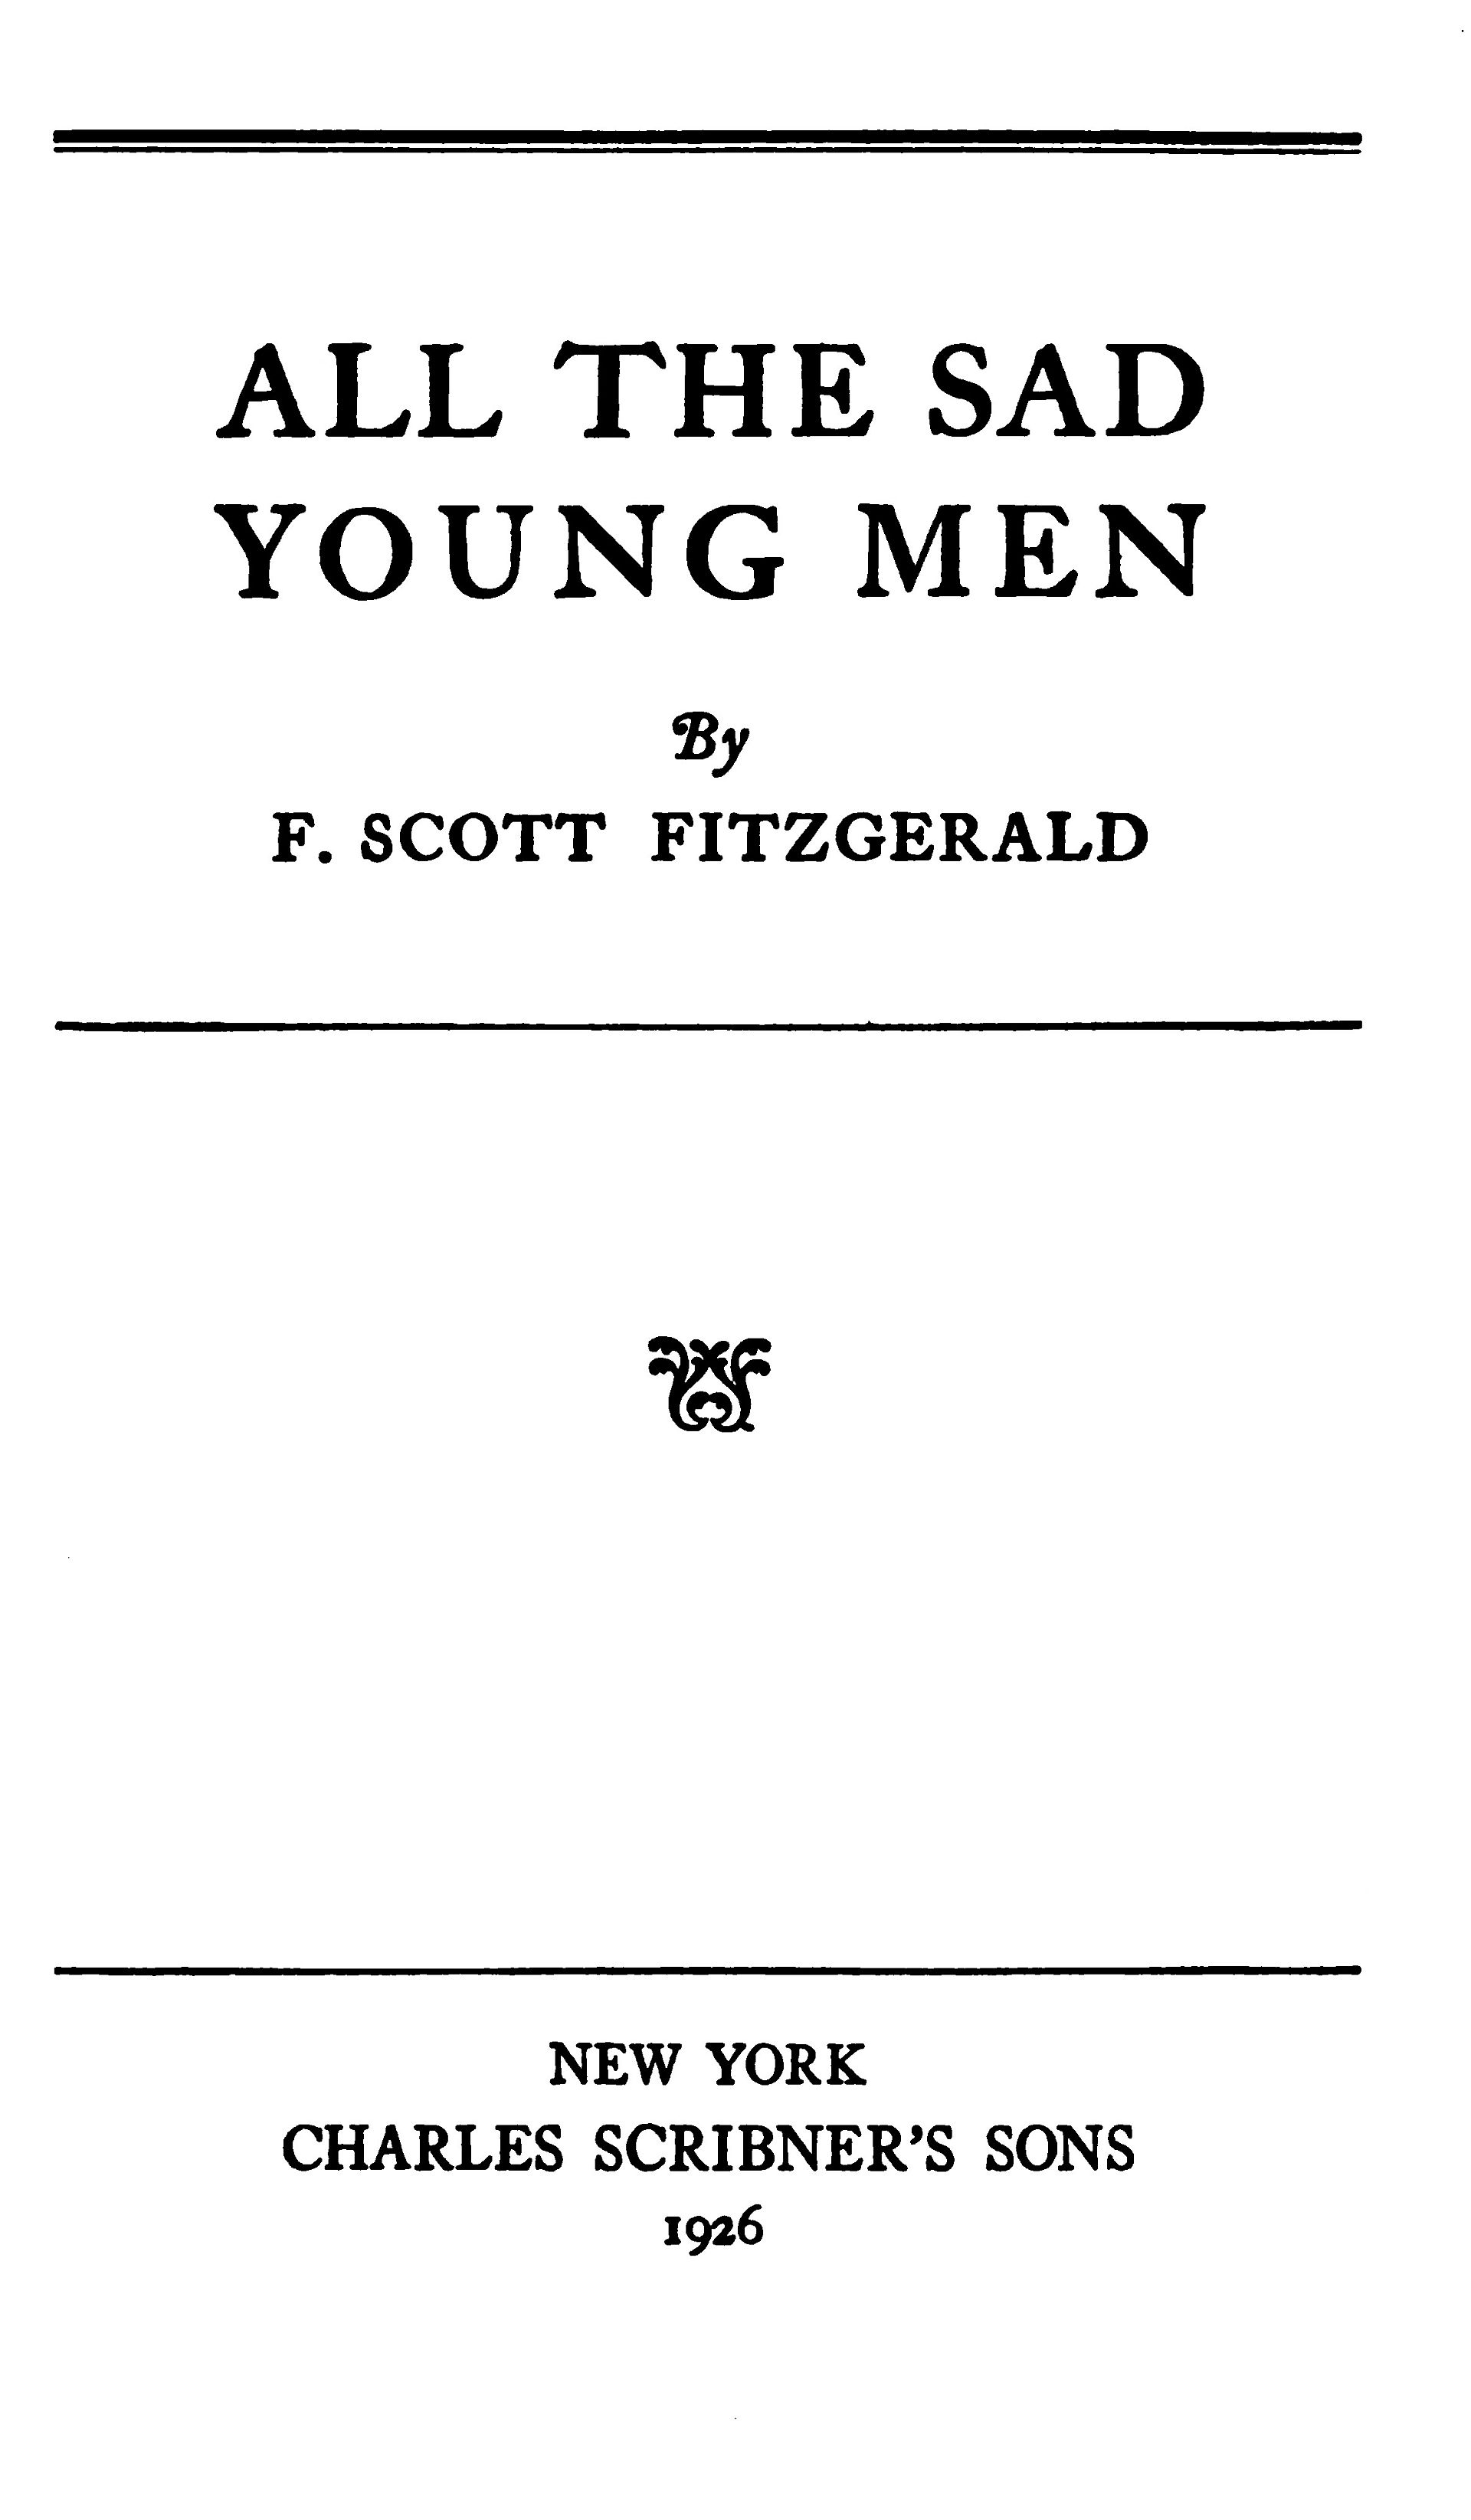 The Project Gutenberg eBook of All the Sad Young Men, by F. Scott